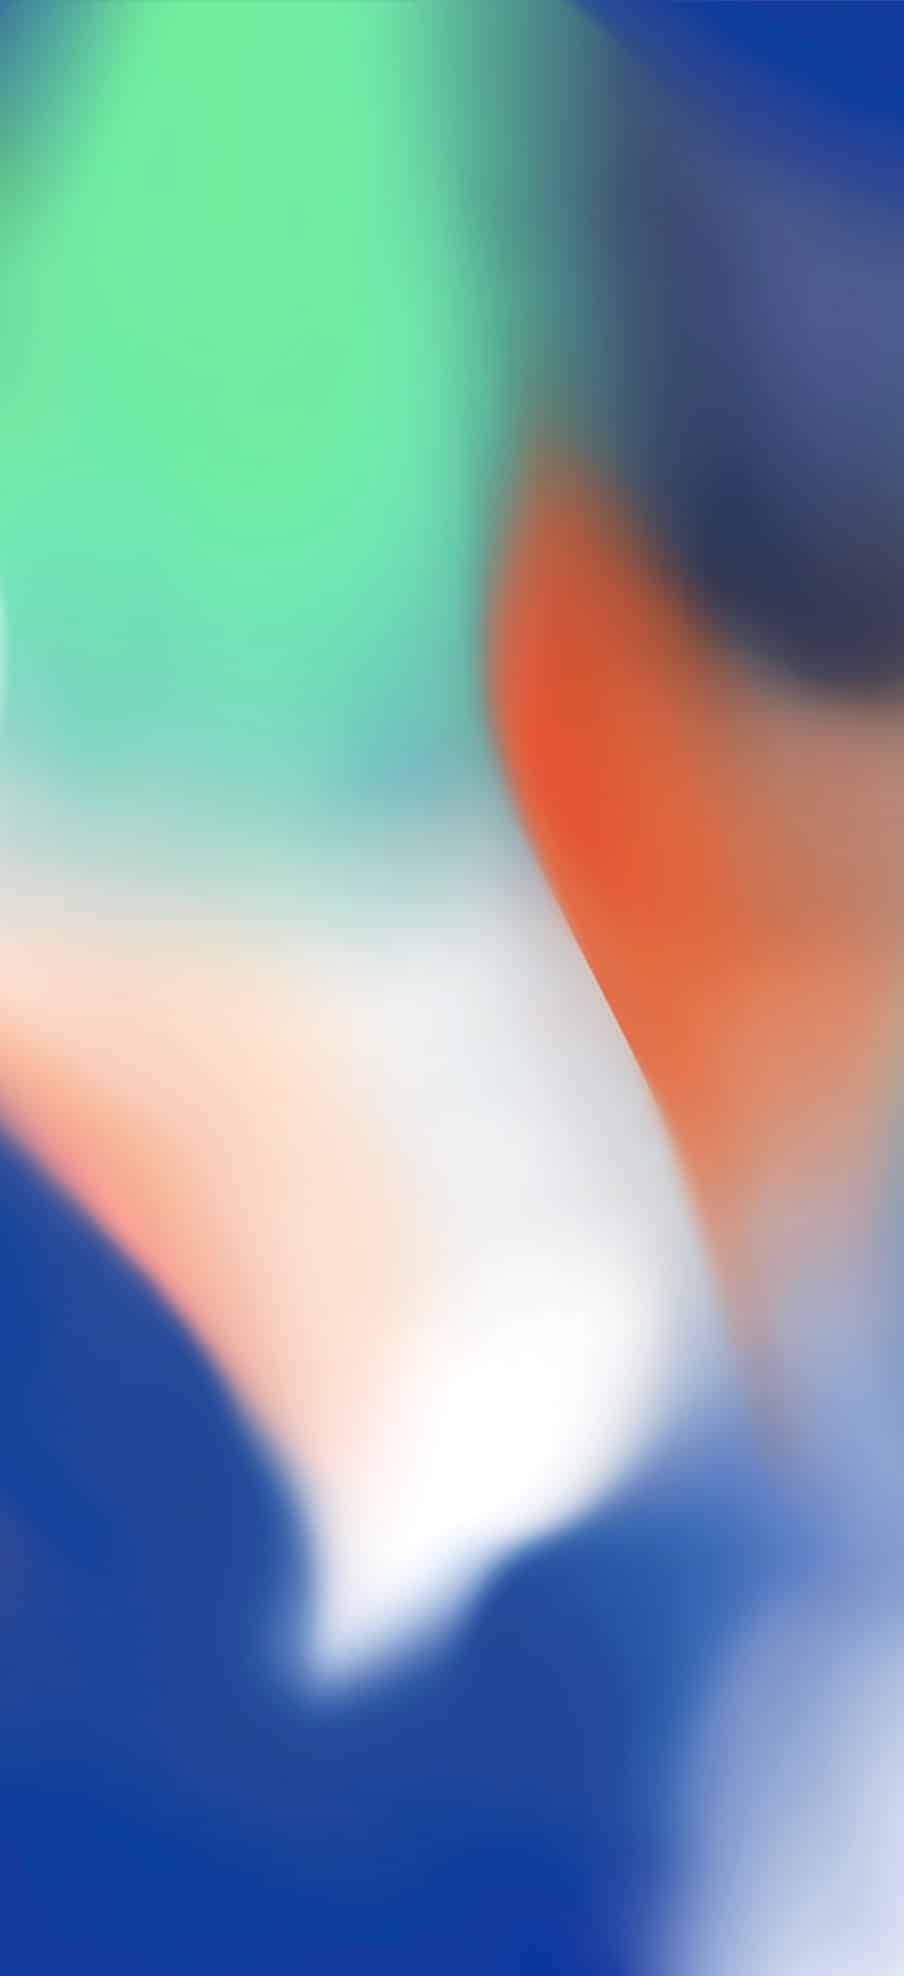 Download New iPhone X Wallpapers From iOS 11.2